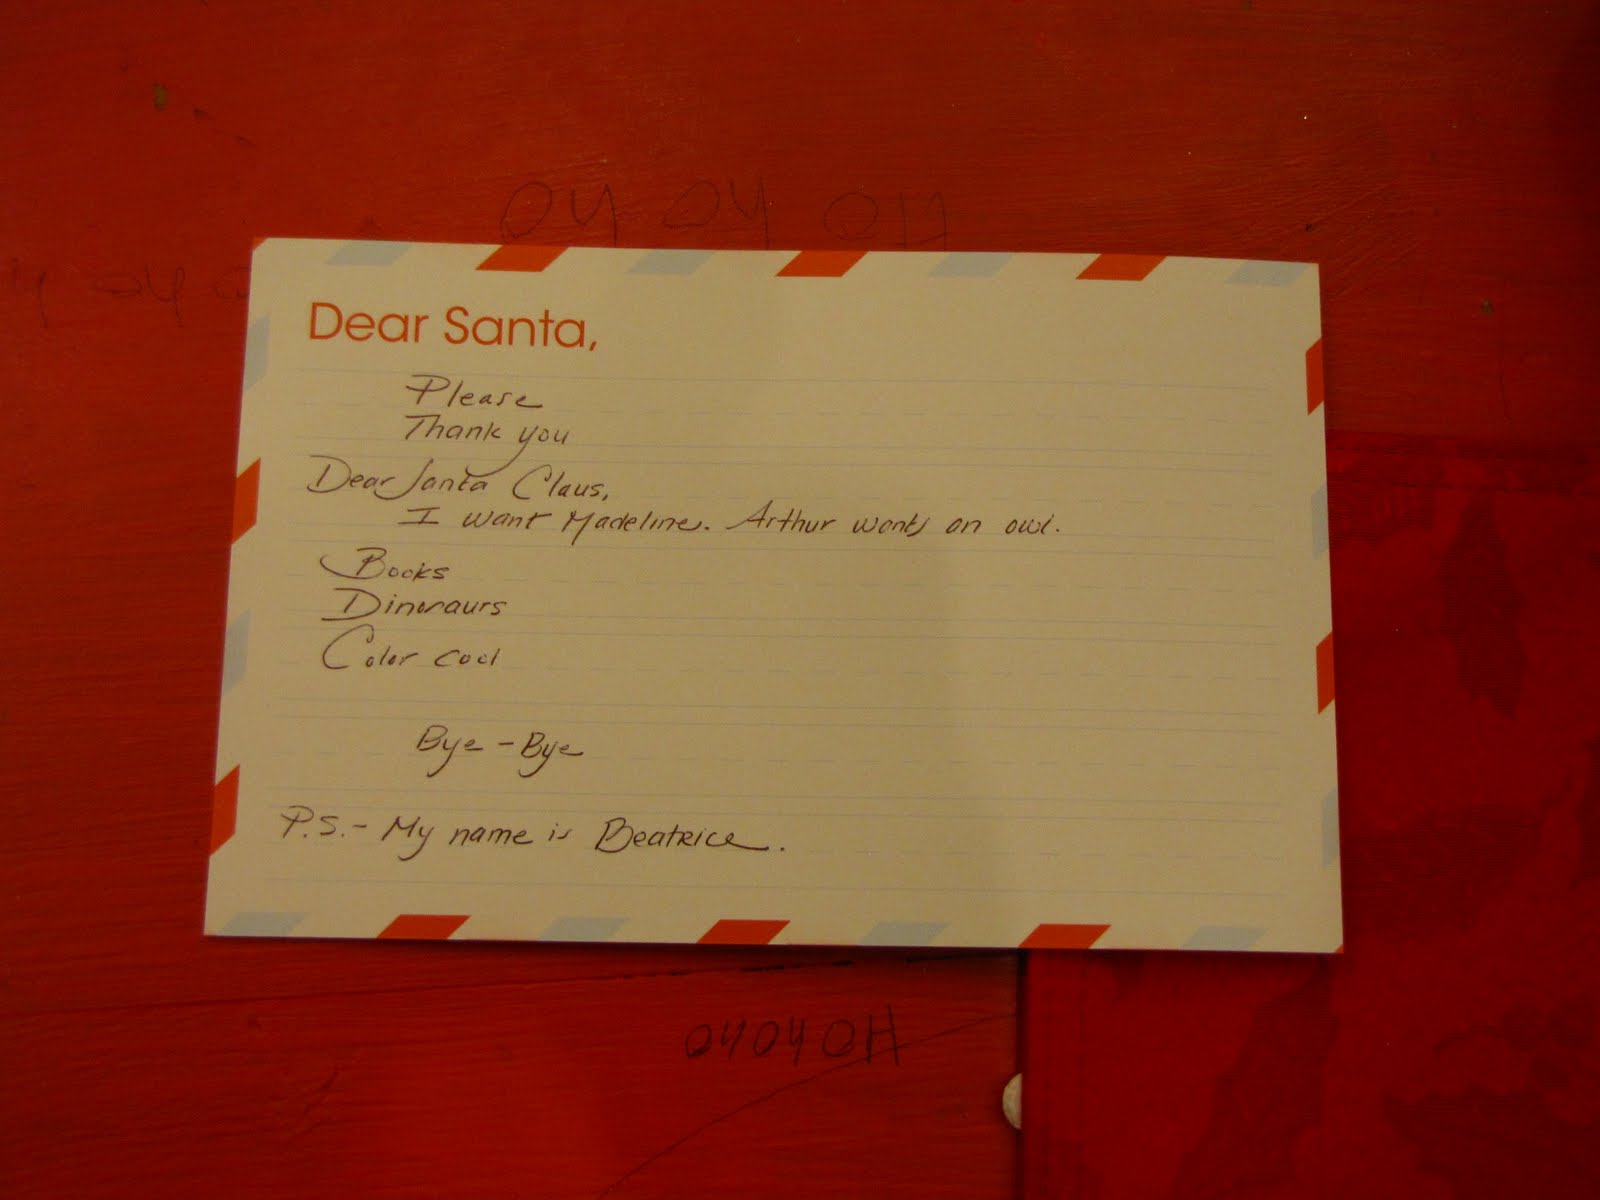 Writing A Letter To Santa Claus